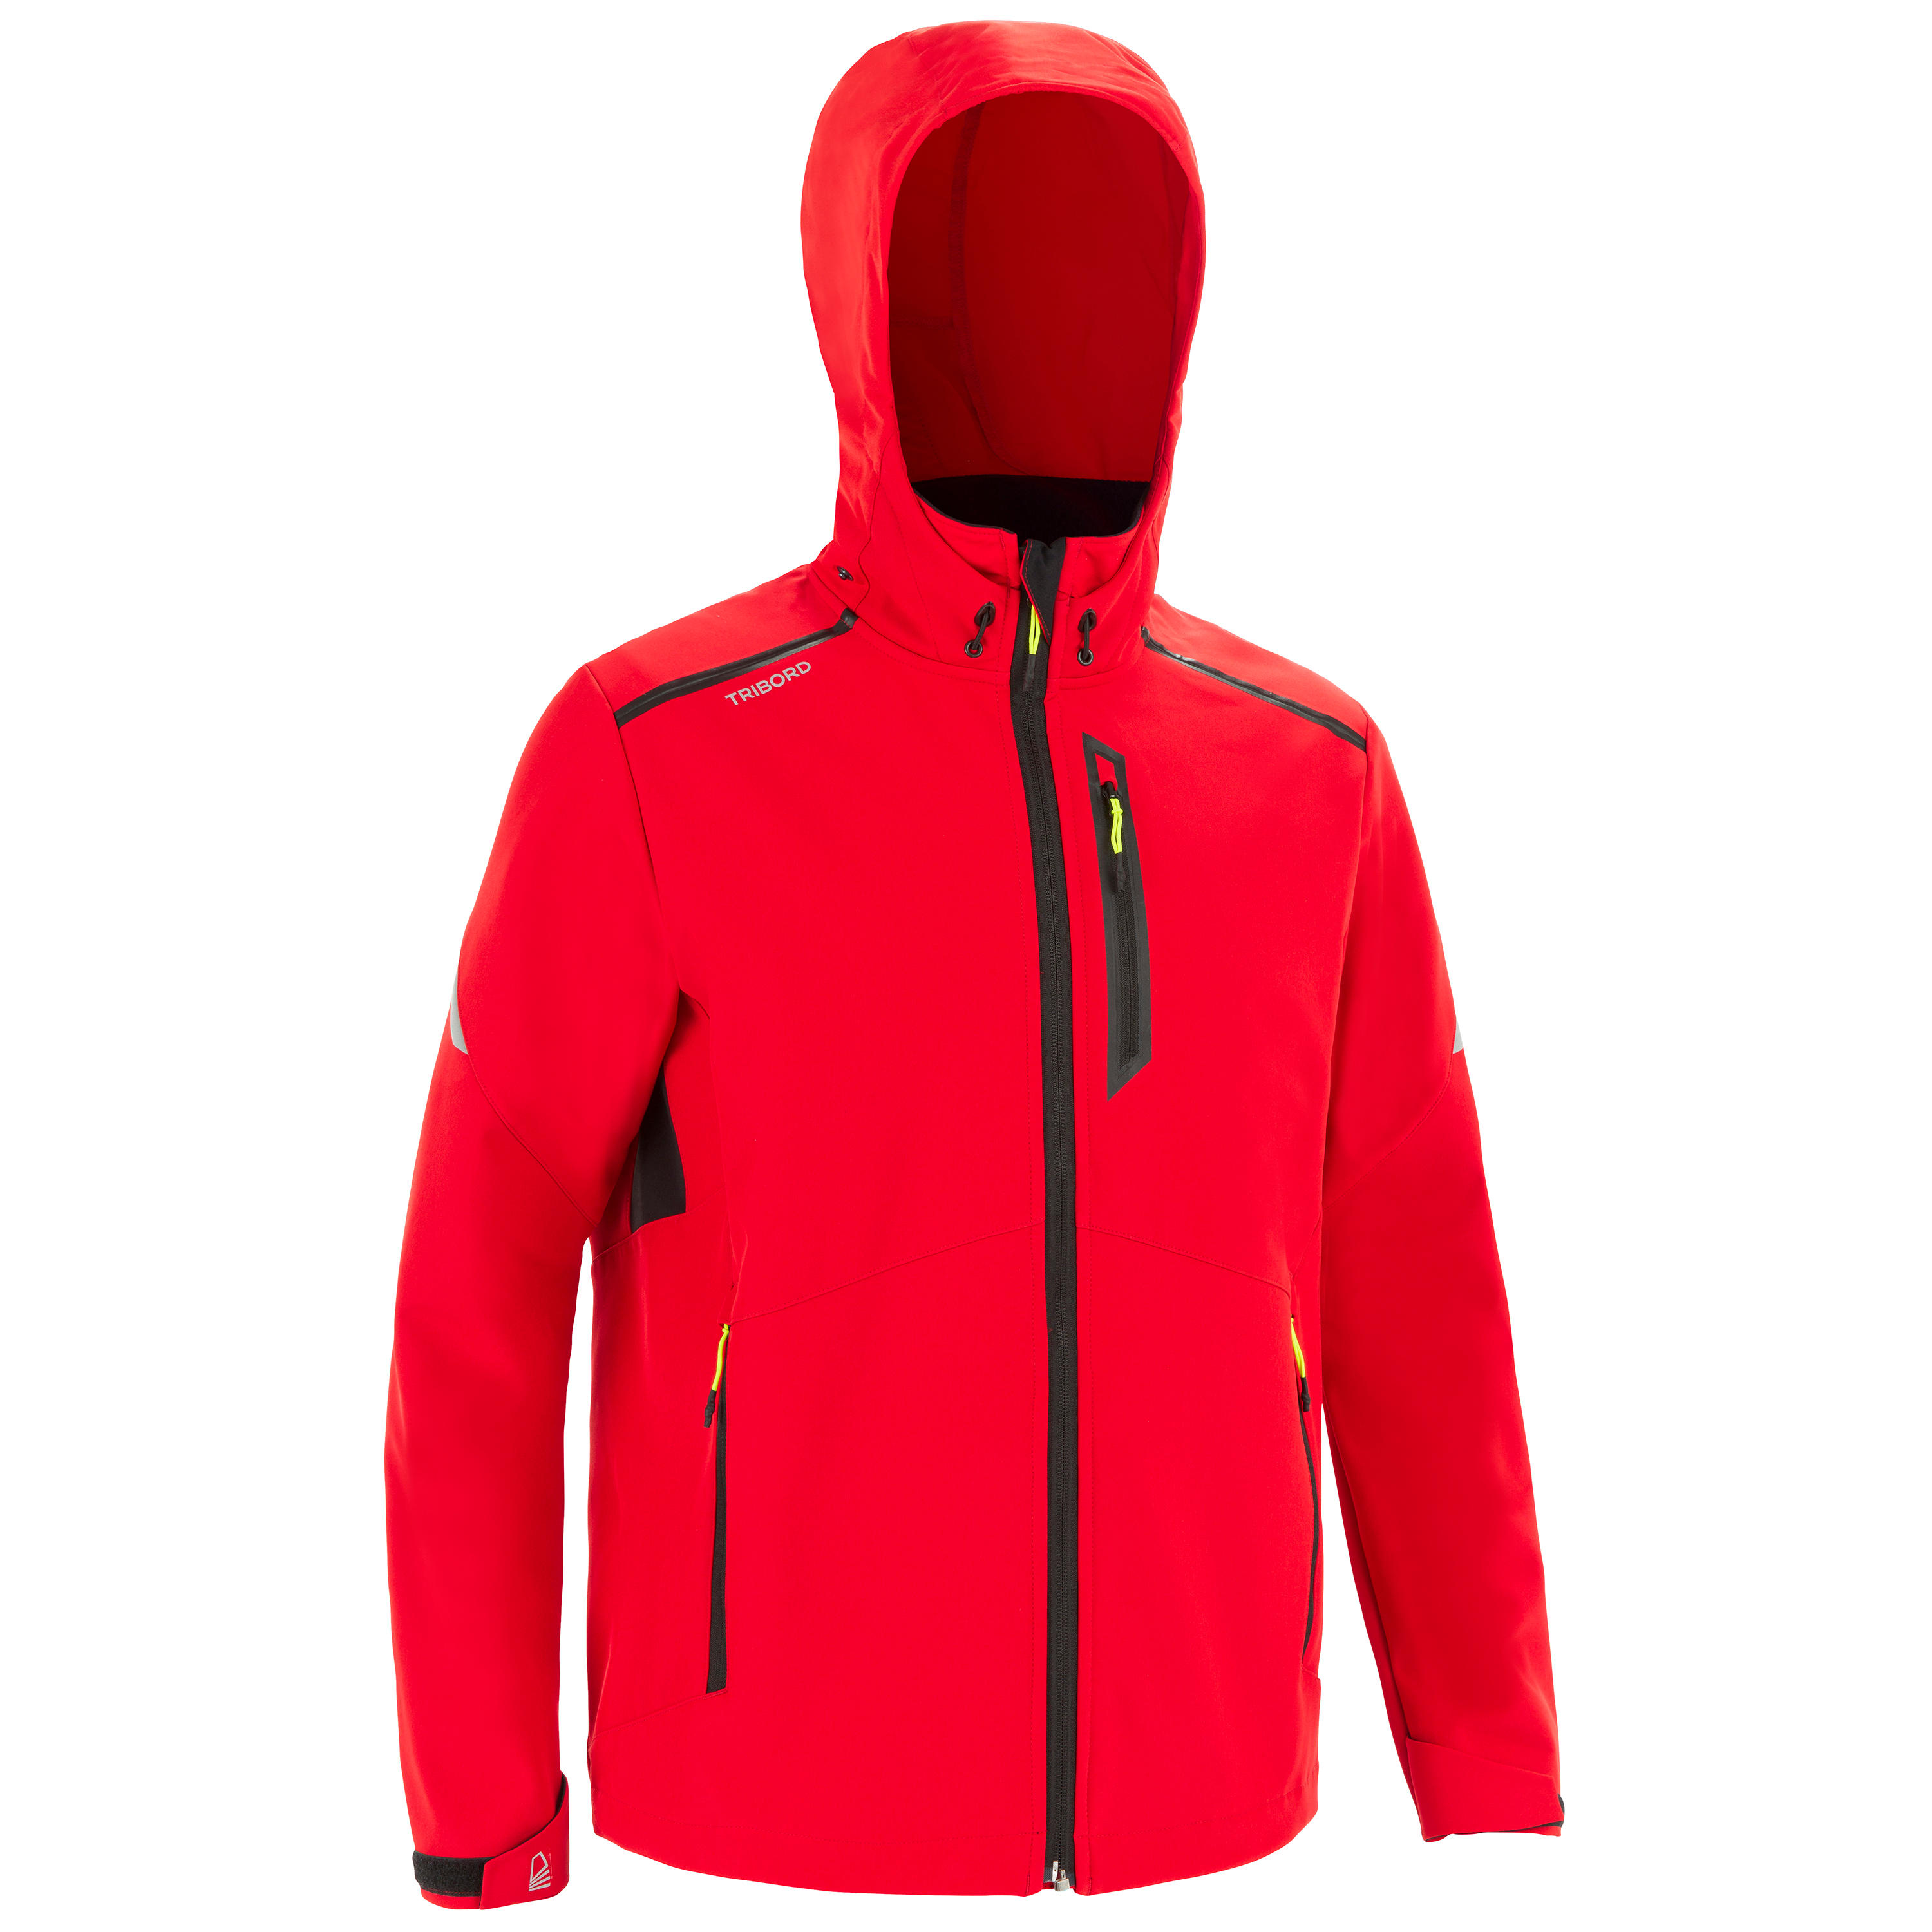 TRIBORD Men’s Sailing windproof Softshell jacket 900 - Red